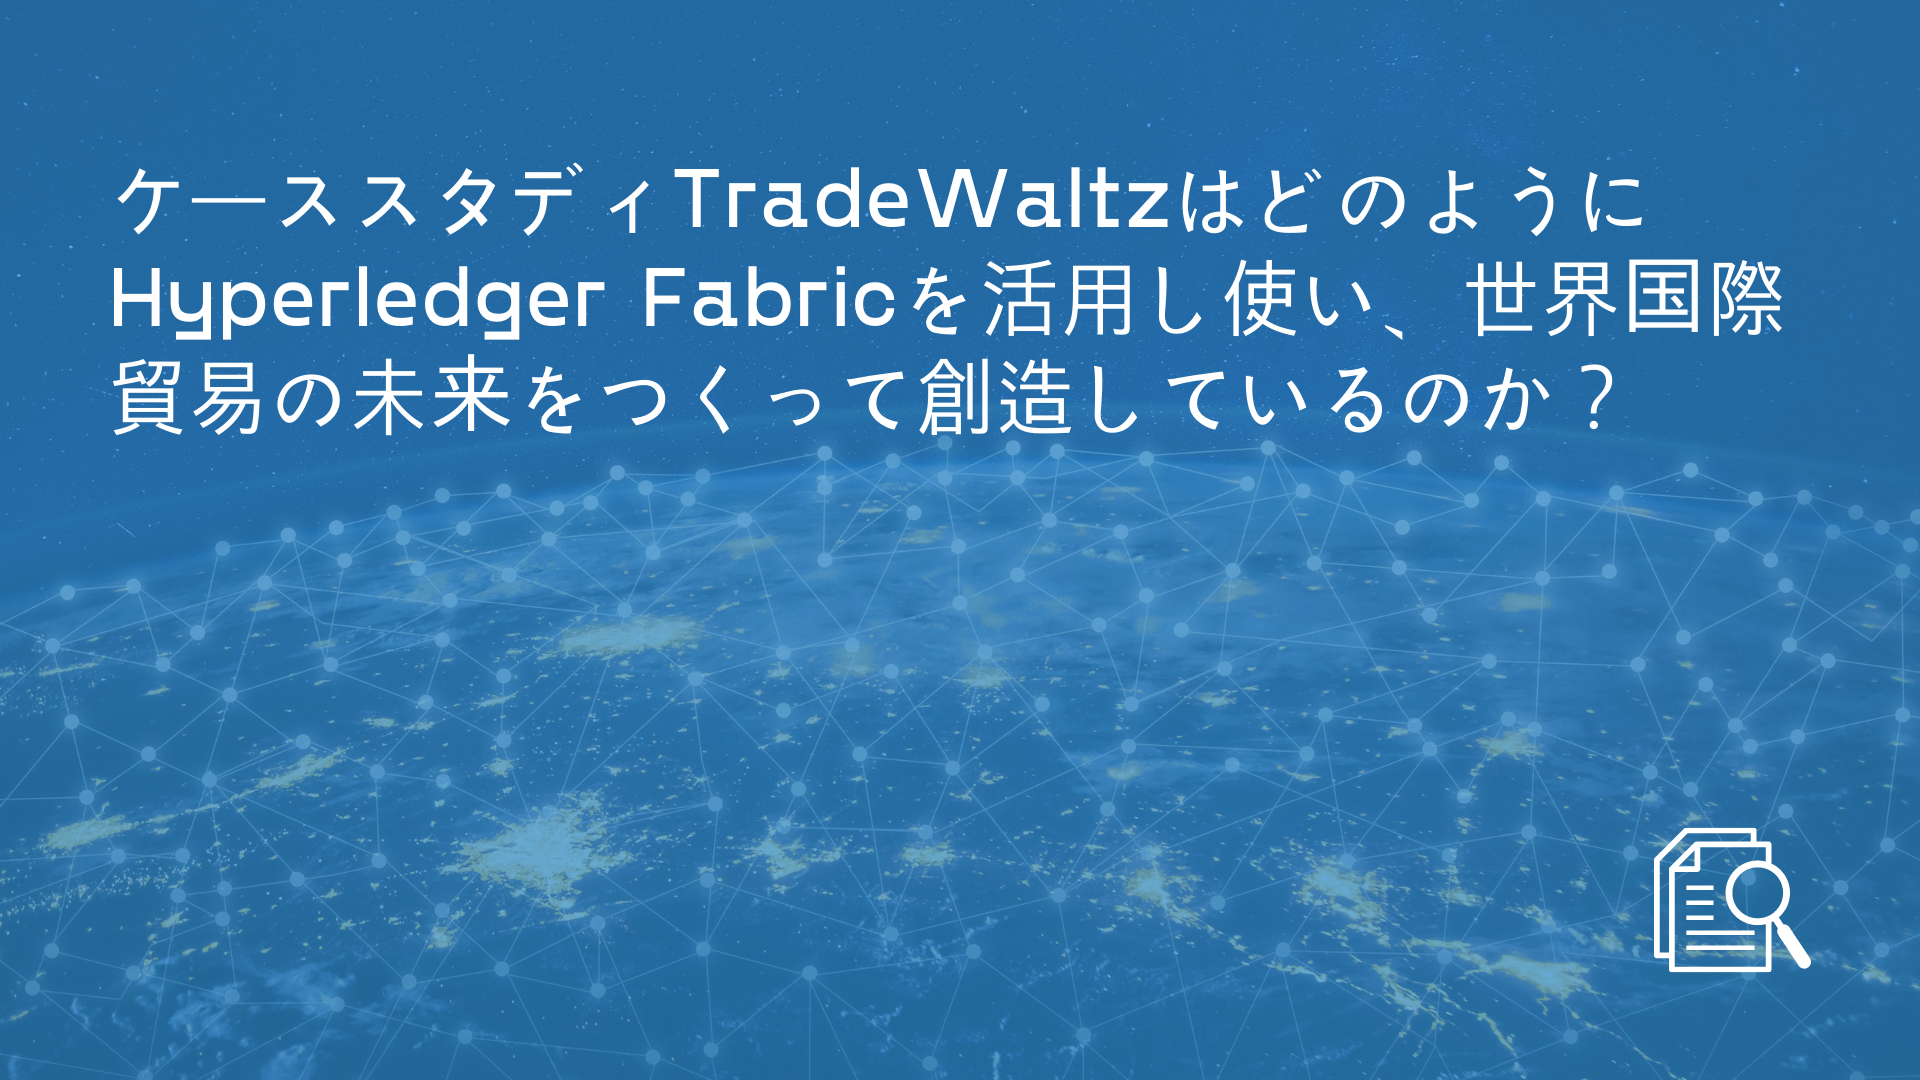 How TradeWaltz is Using Hyperledger Fabric to Create the Future of Global Trade (1)-1